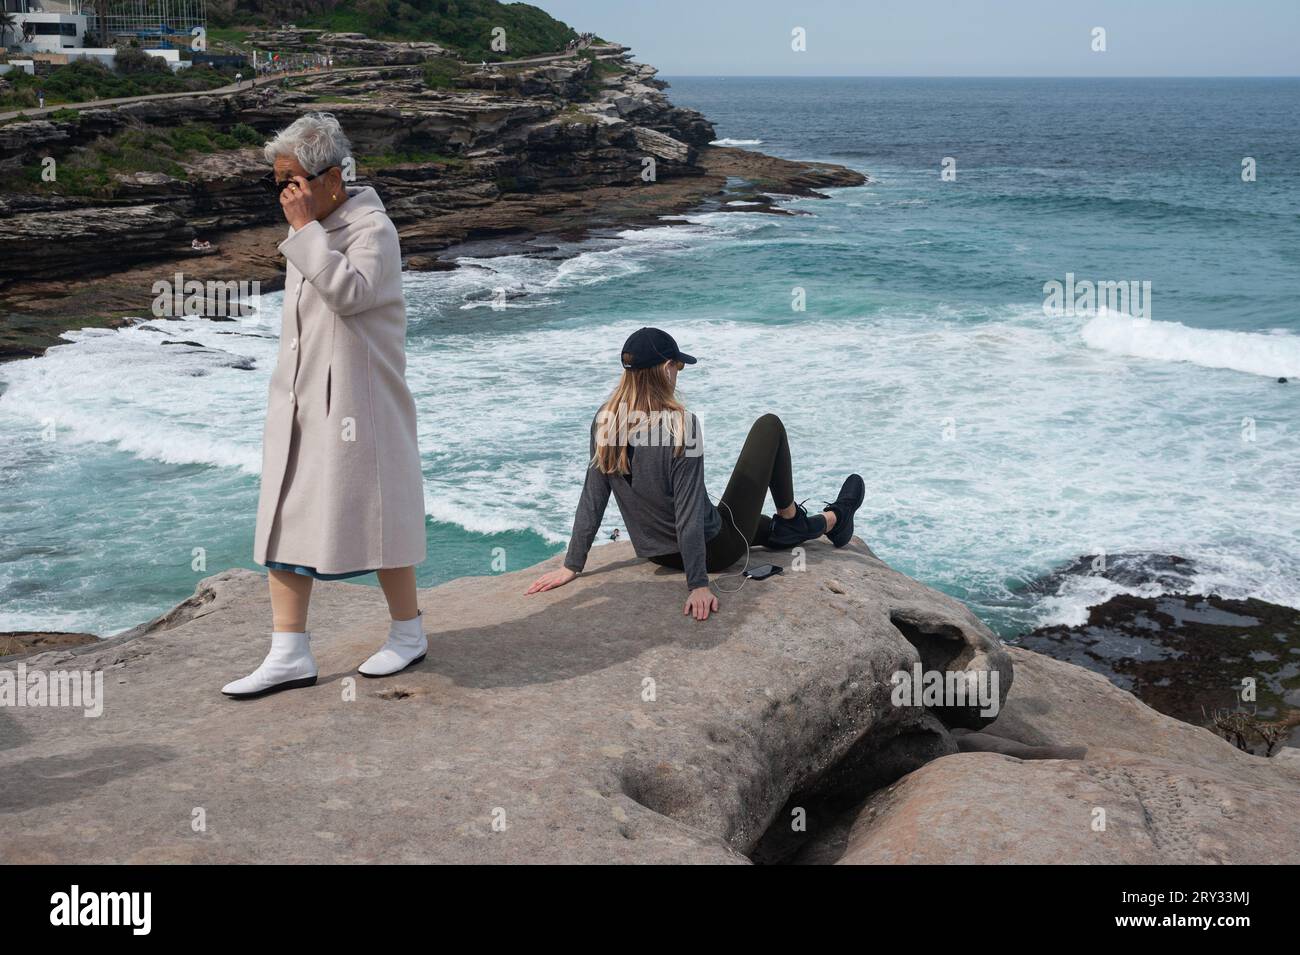 27.09.2019, Sydney, New South Wales, Australia - Young and elderly woman are seen on the cliffs at Tamarama Point along Bondi to Bronte Coastal Walk. Stock Photo